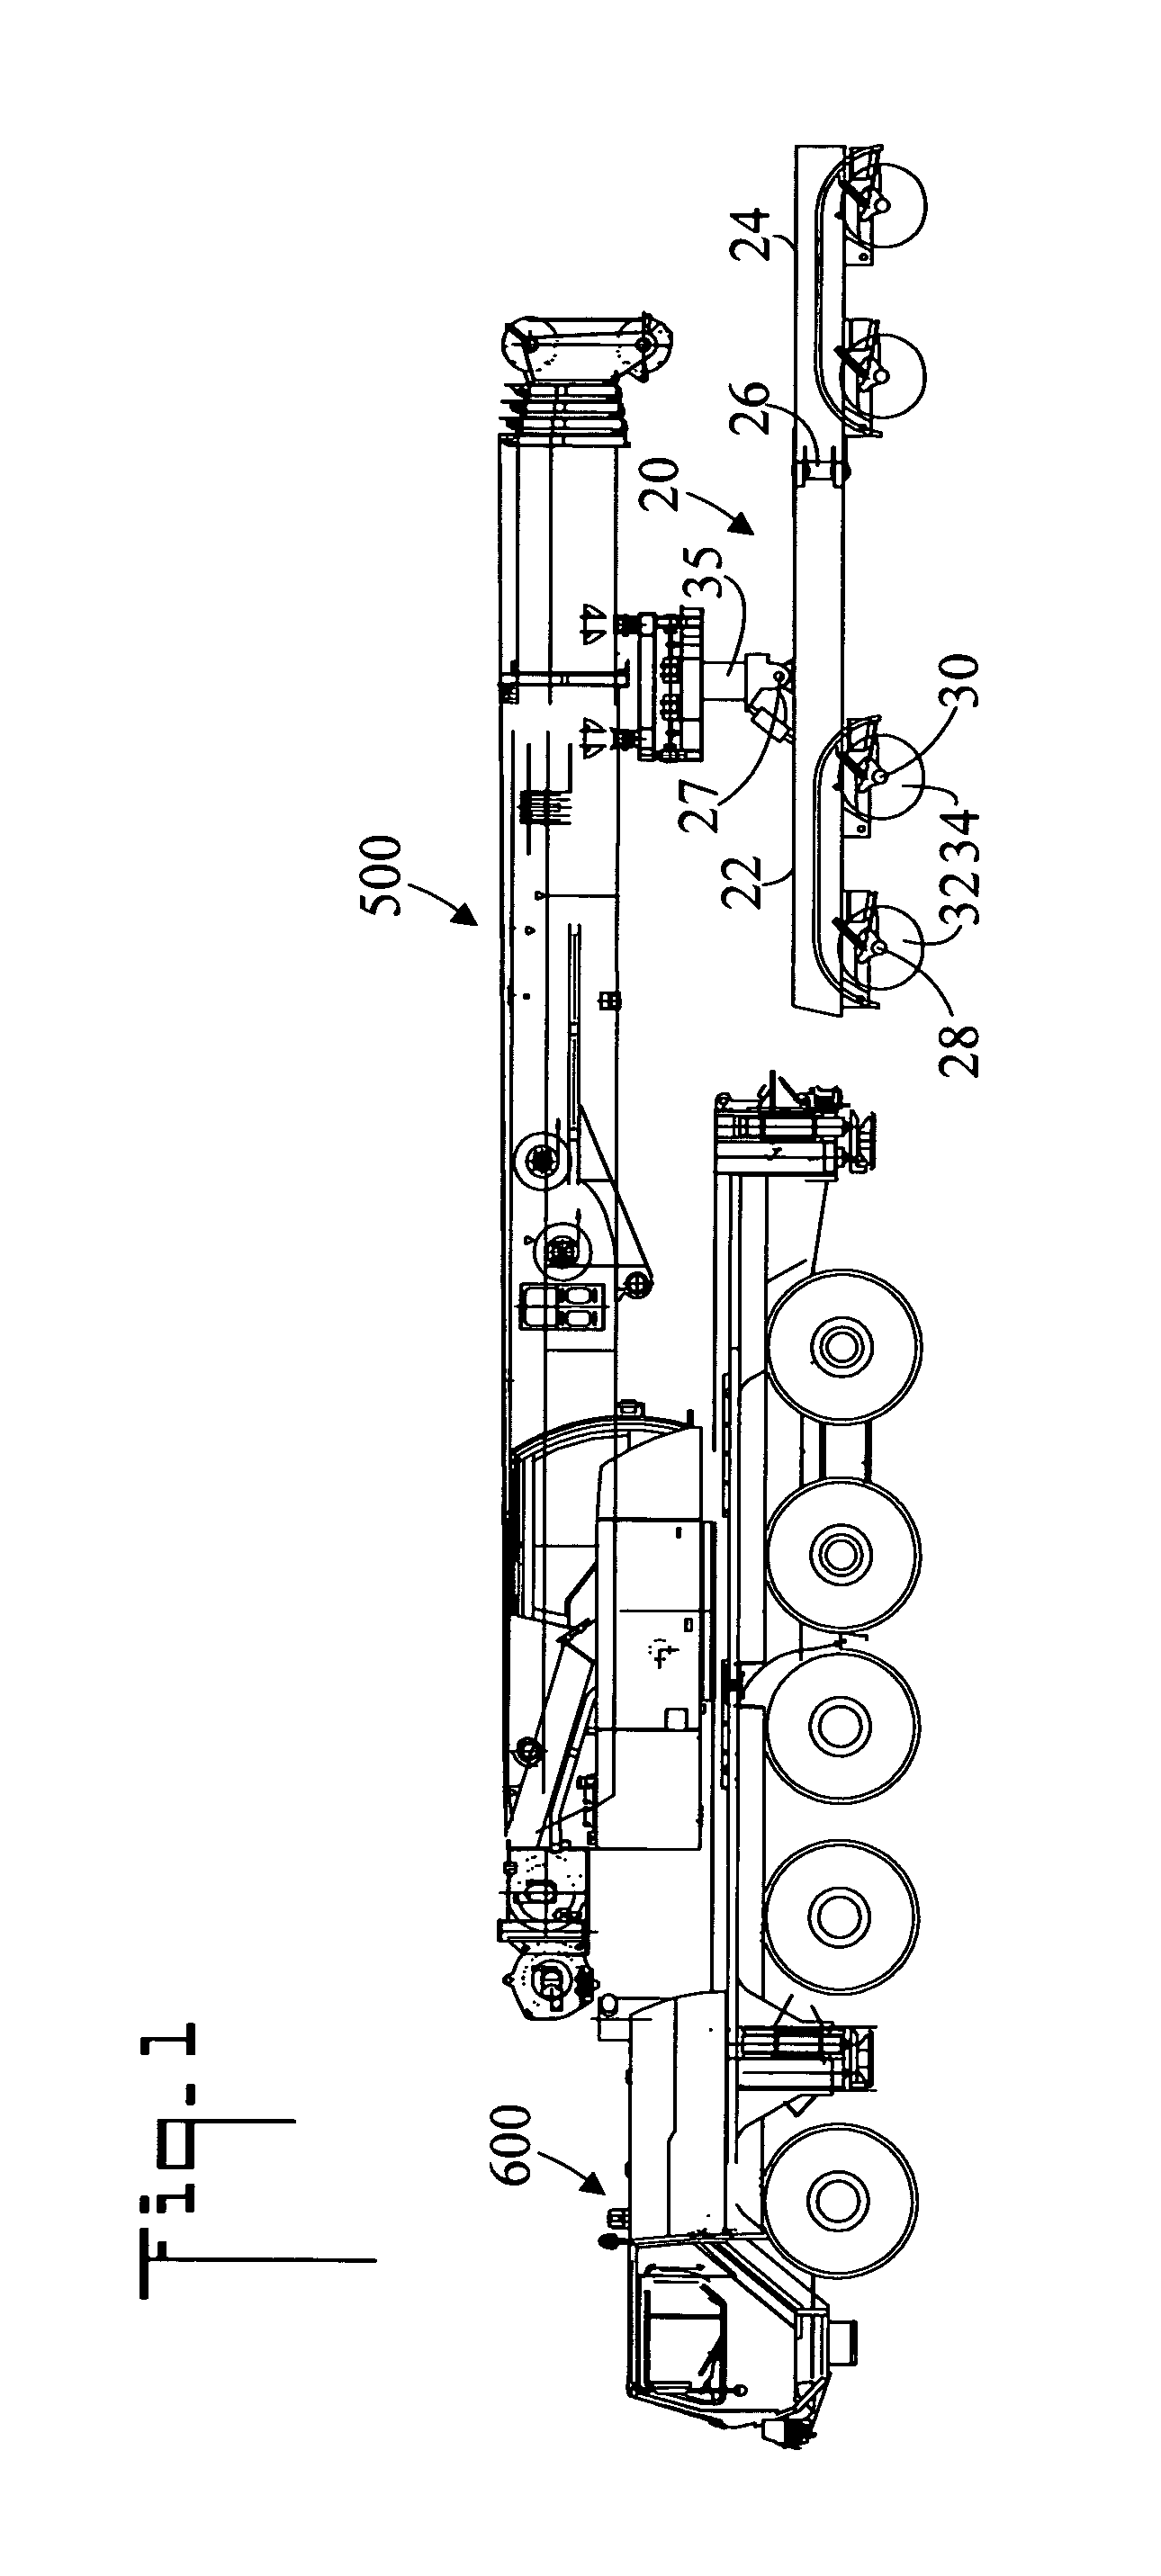 Method for improving the turning characteristics of a boom support vehicle and apparatus therefor